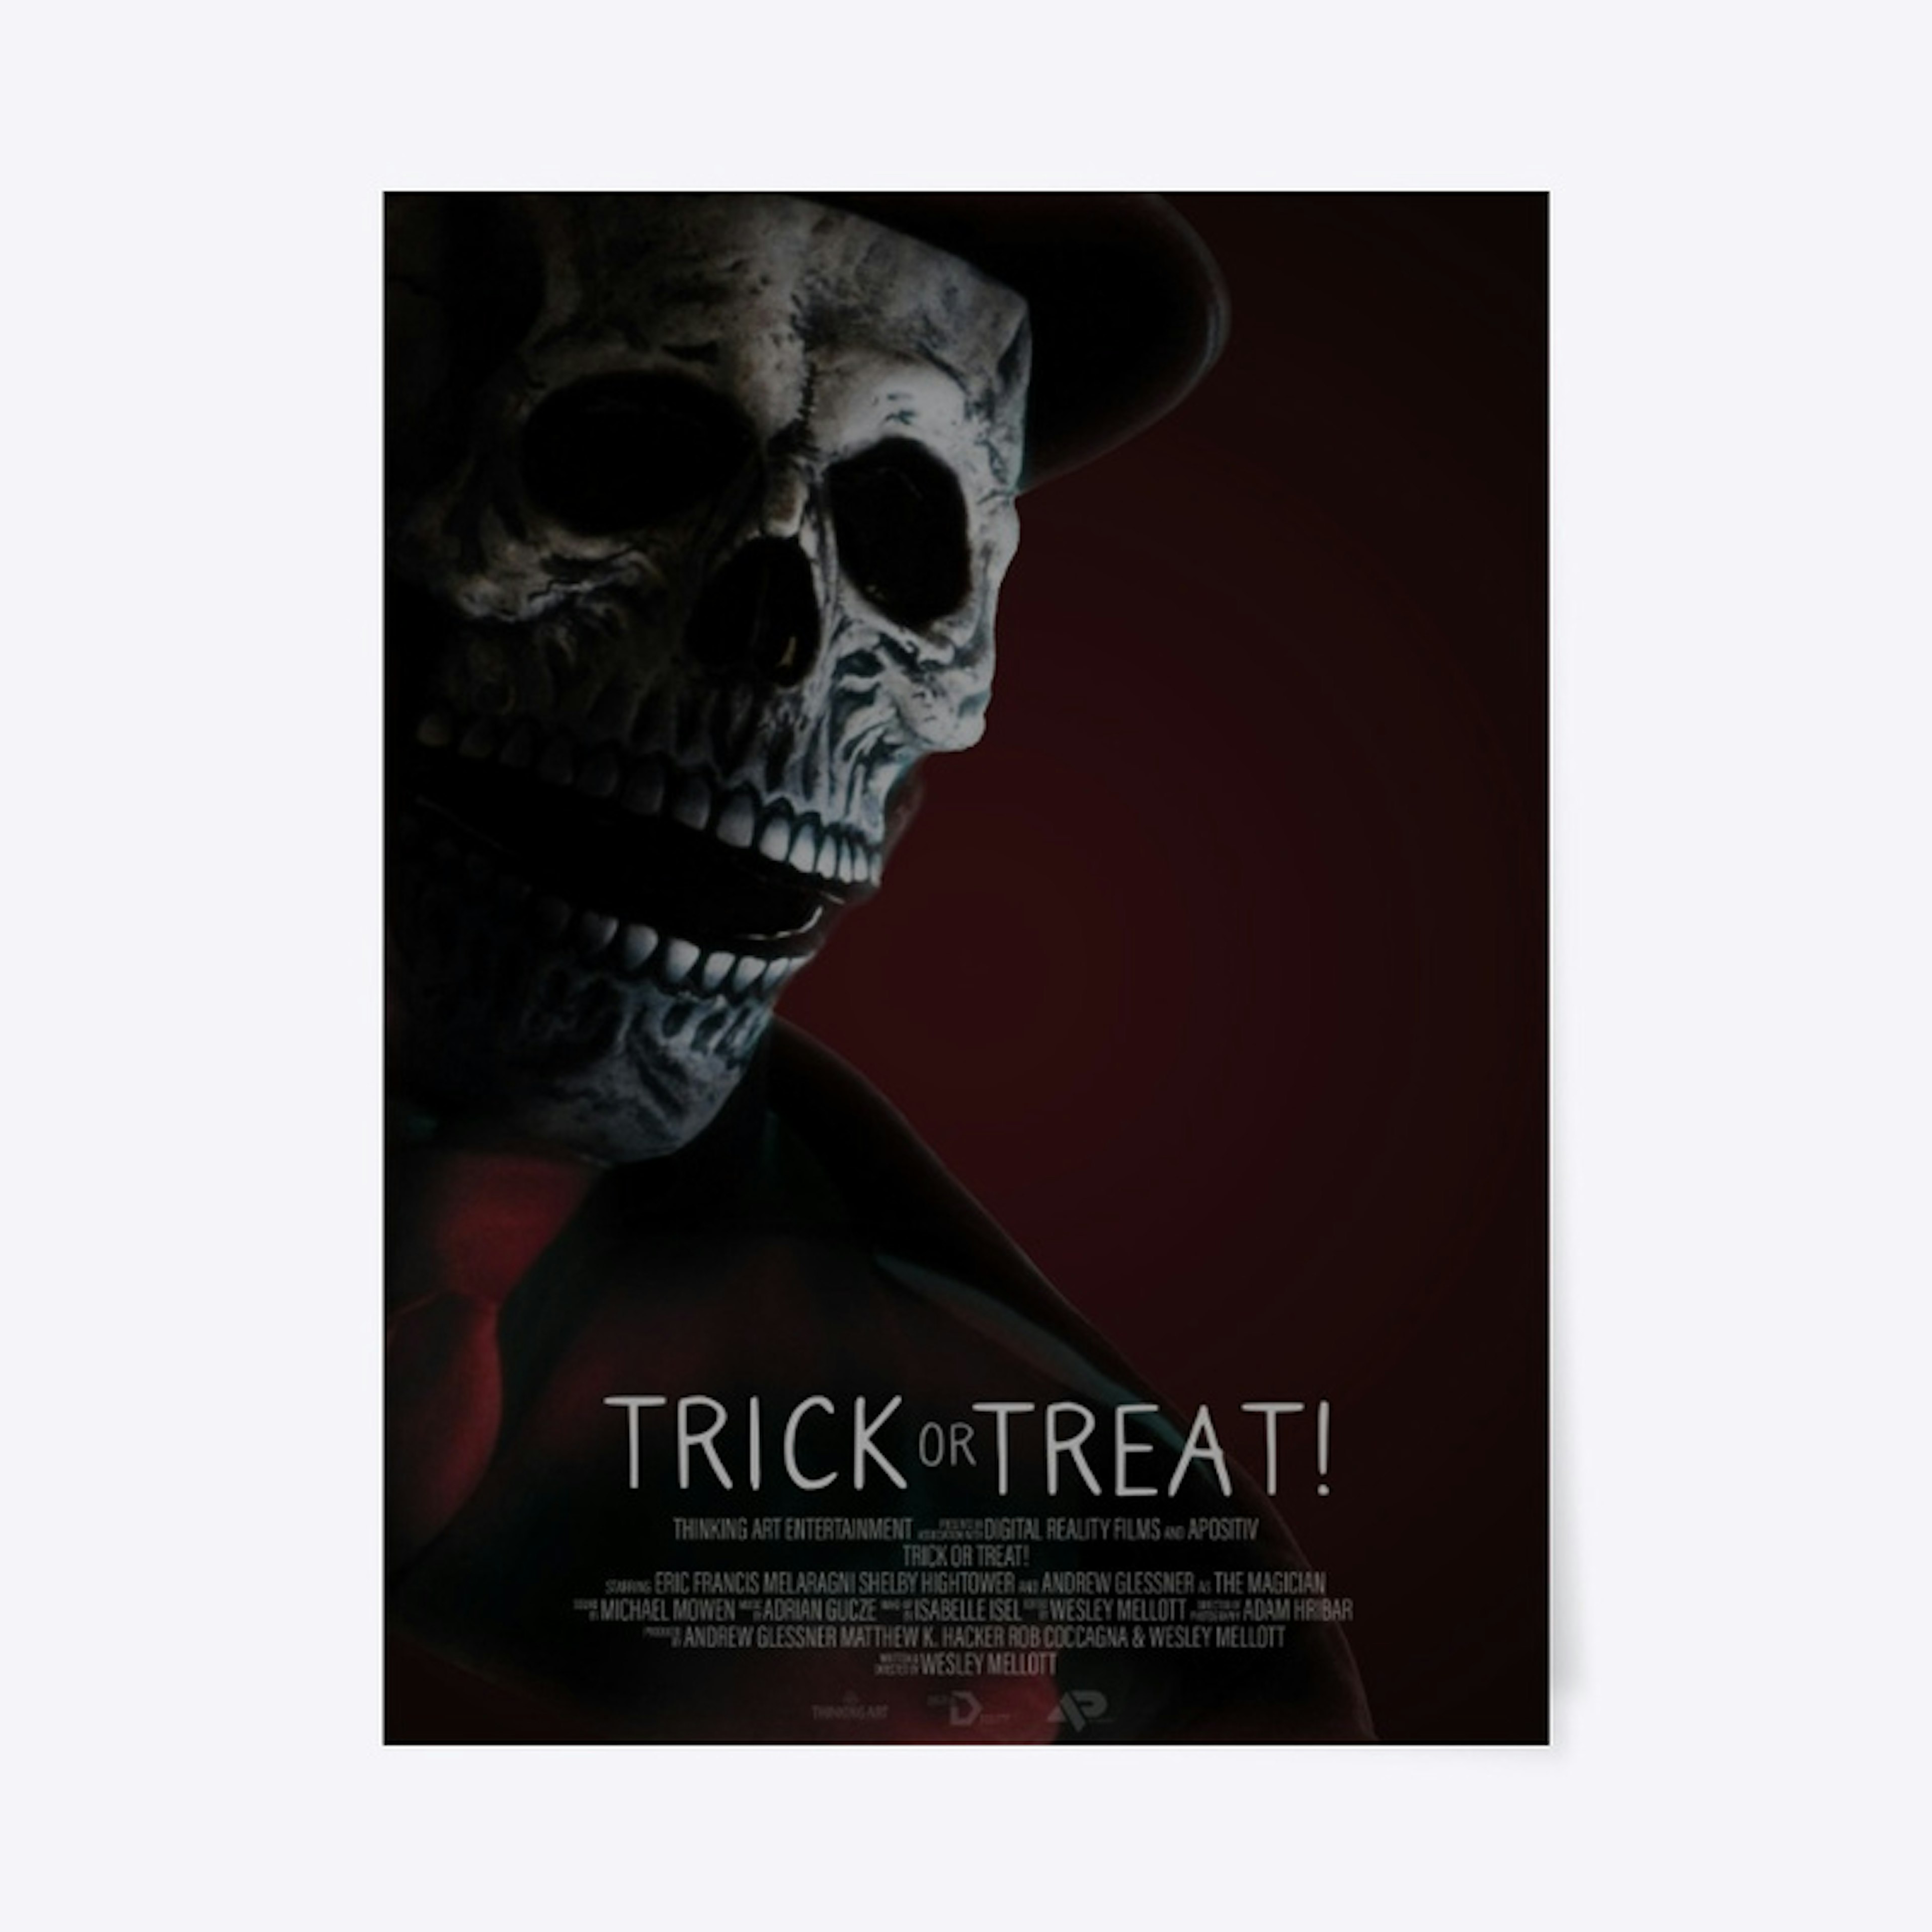 TRICK or TREAT! Movie Poster